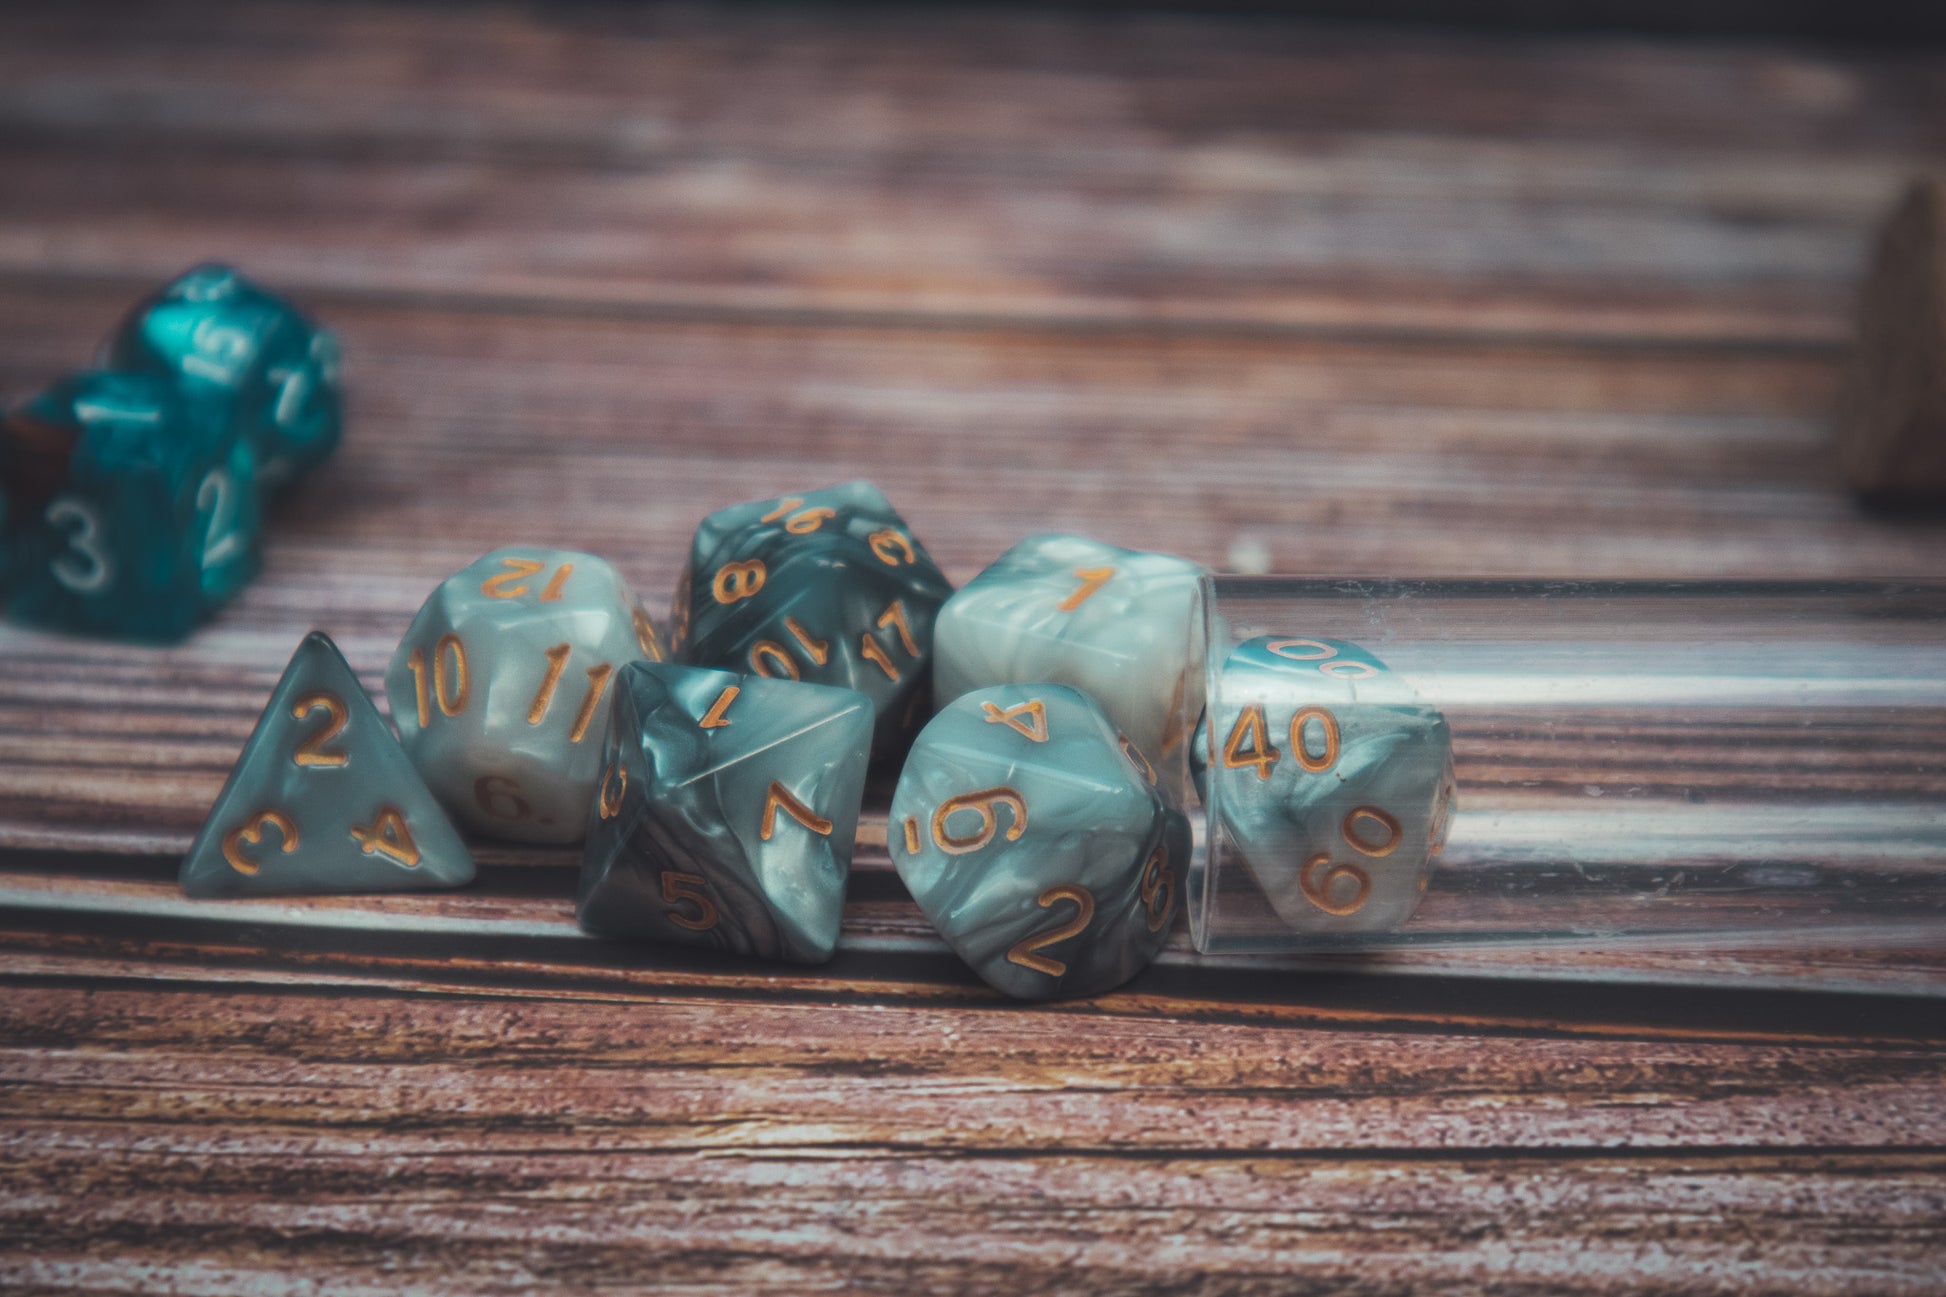 Underdark Ore Polyhedral dice set - Soft edge - The Flaming Feather & Flaming Filament